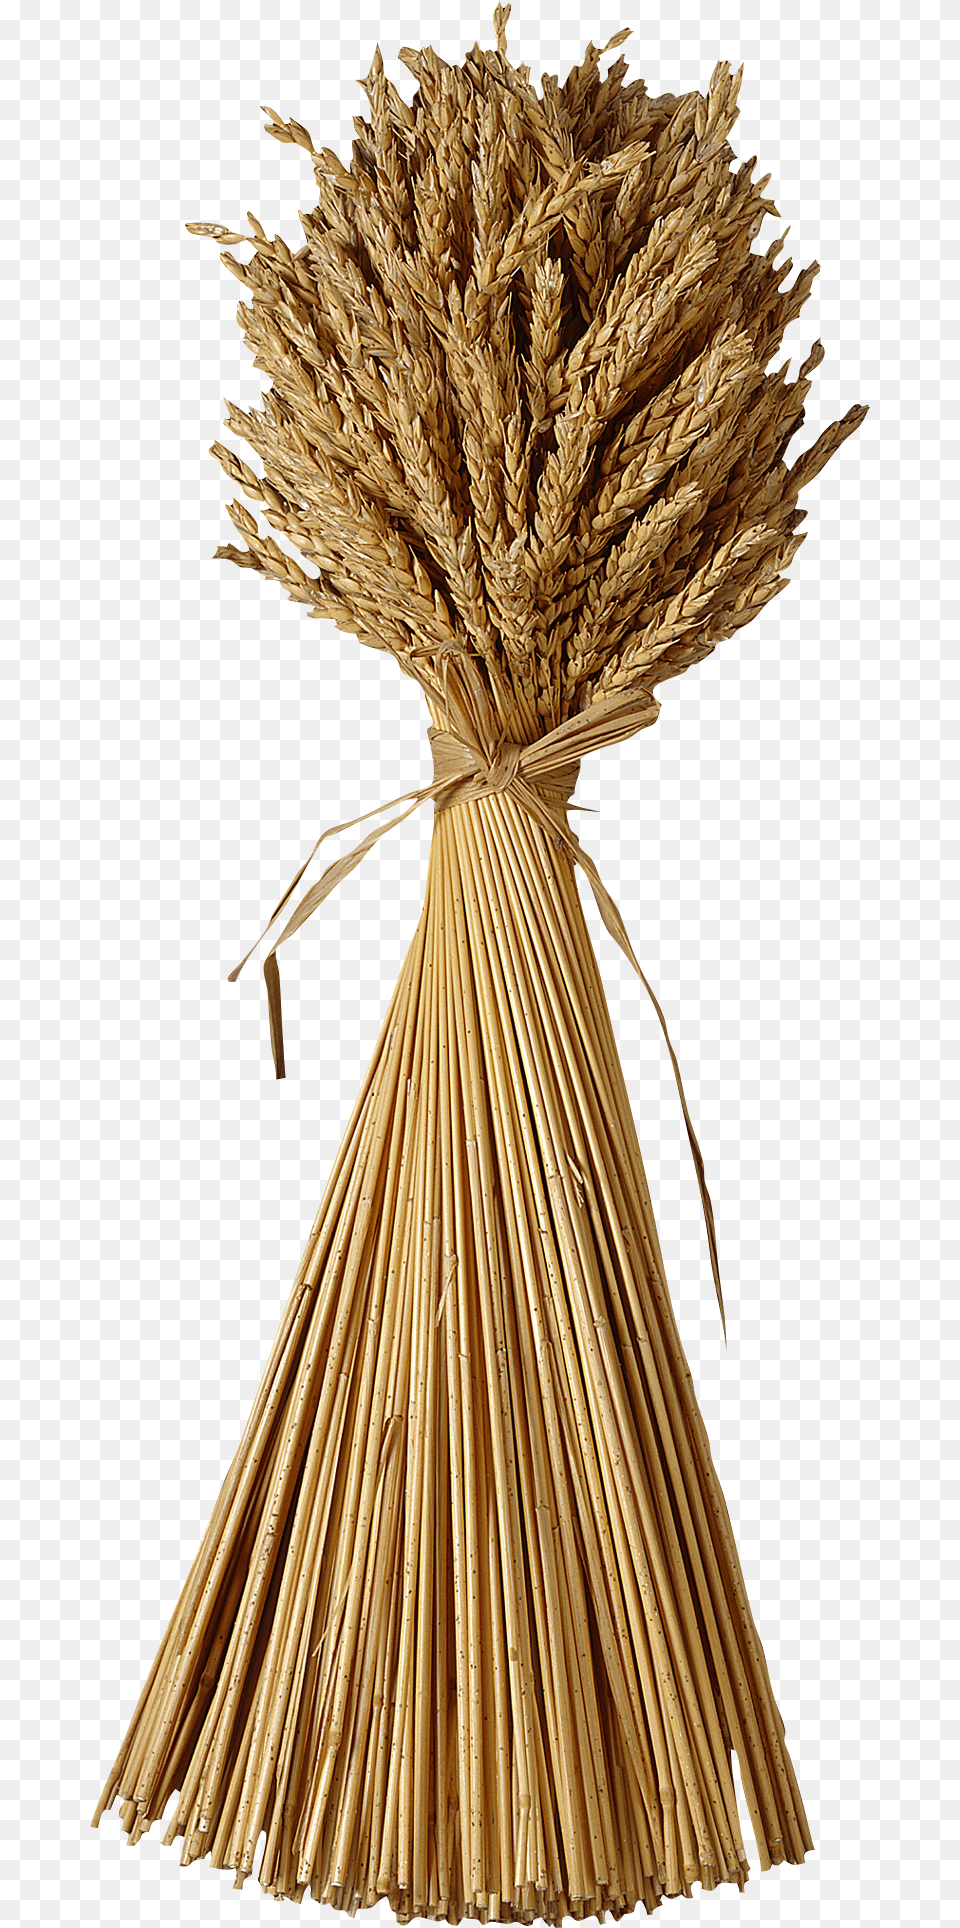 Grain Clipart Wheat Straw Finding Fullness Again What The Book Of Ruth Teaches, Food, Produce, Outdoors, Countryside Free Transparent Png